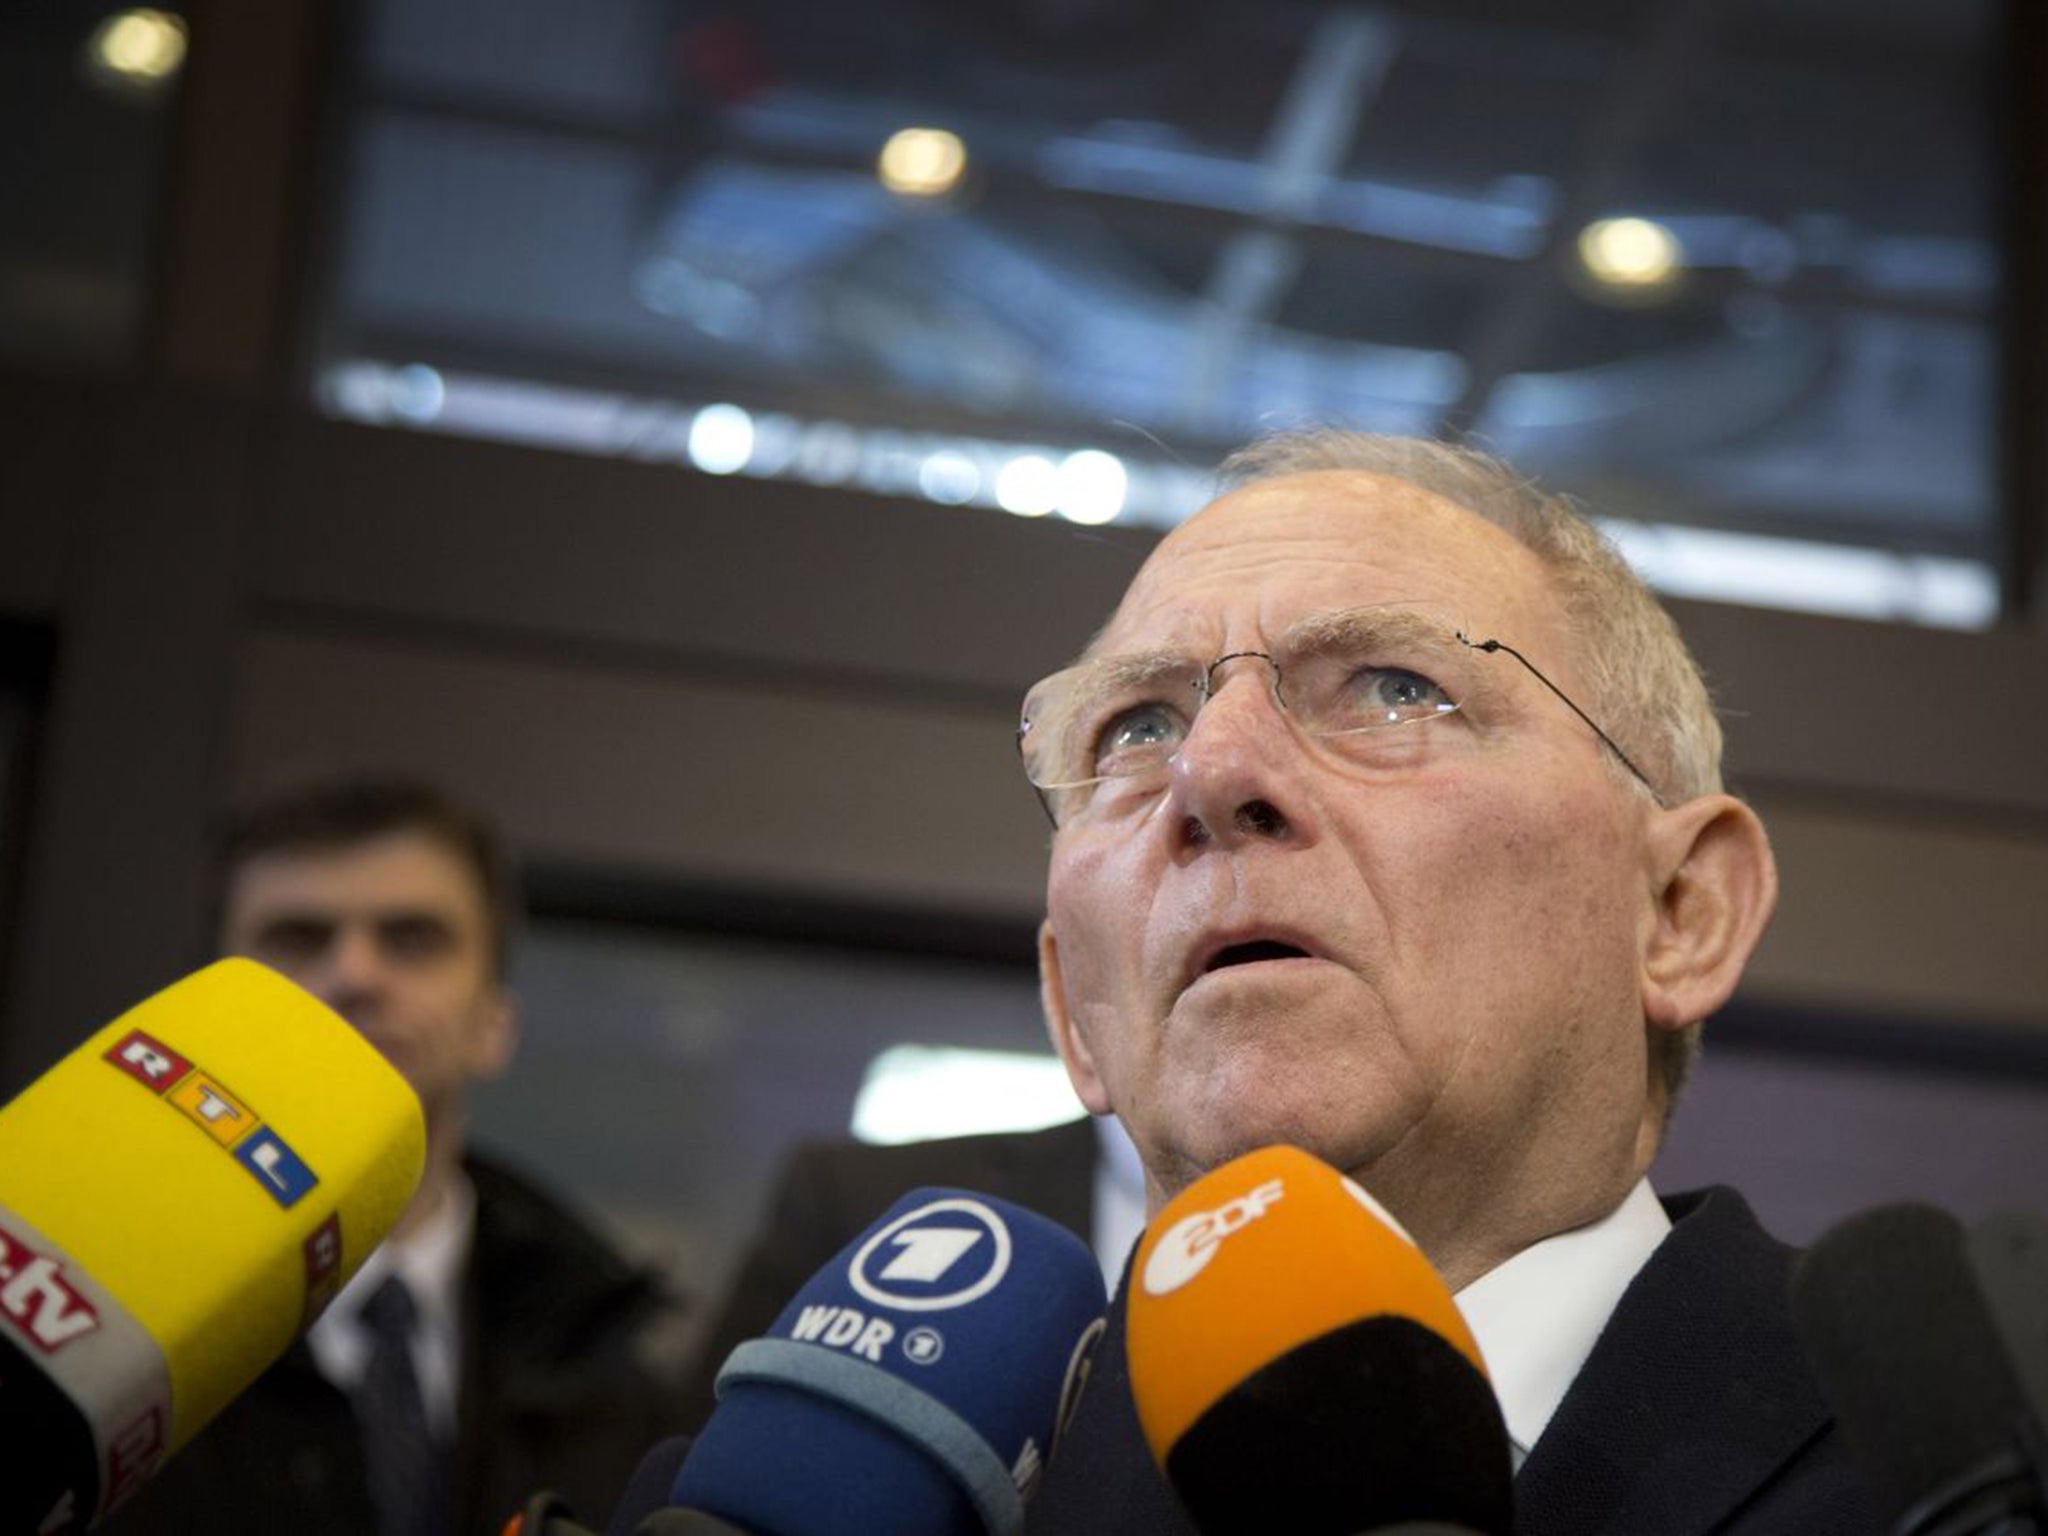 German Finance Minister Wolfgang Schaeuble was one of many to raised their concerns